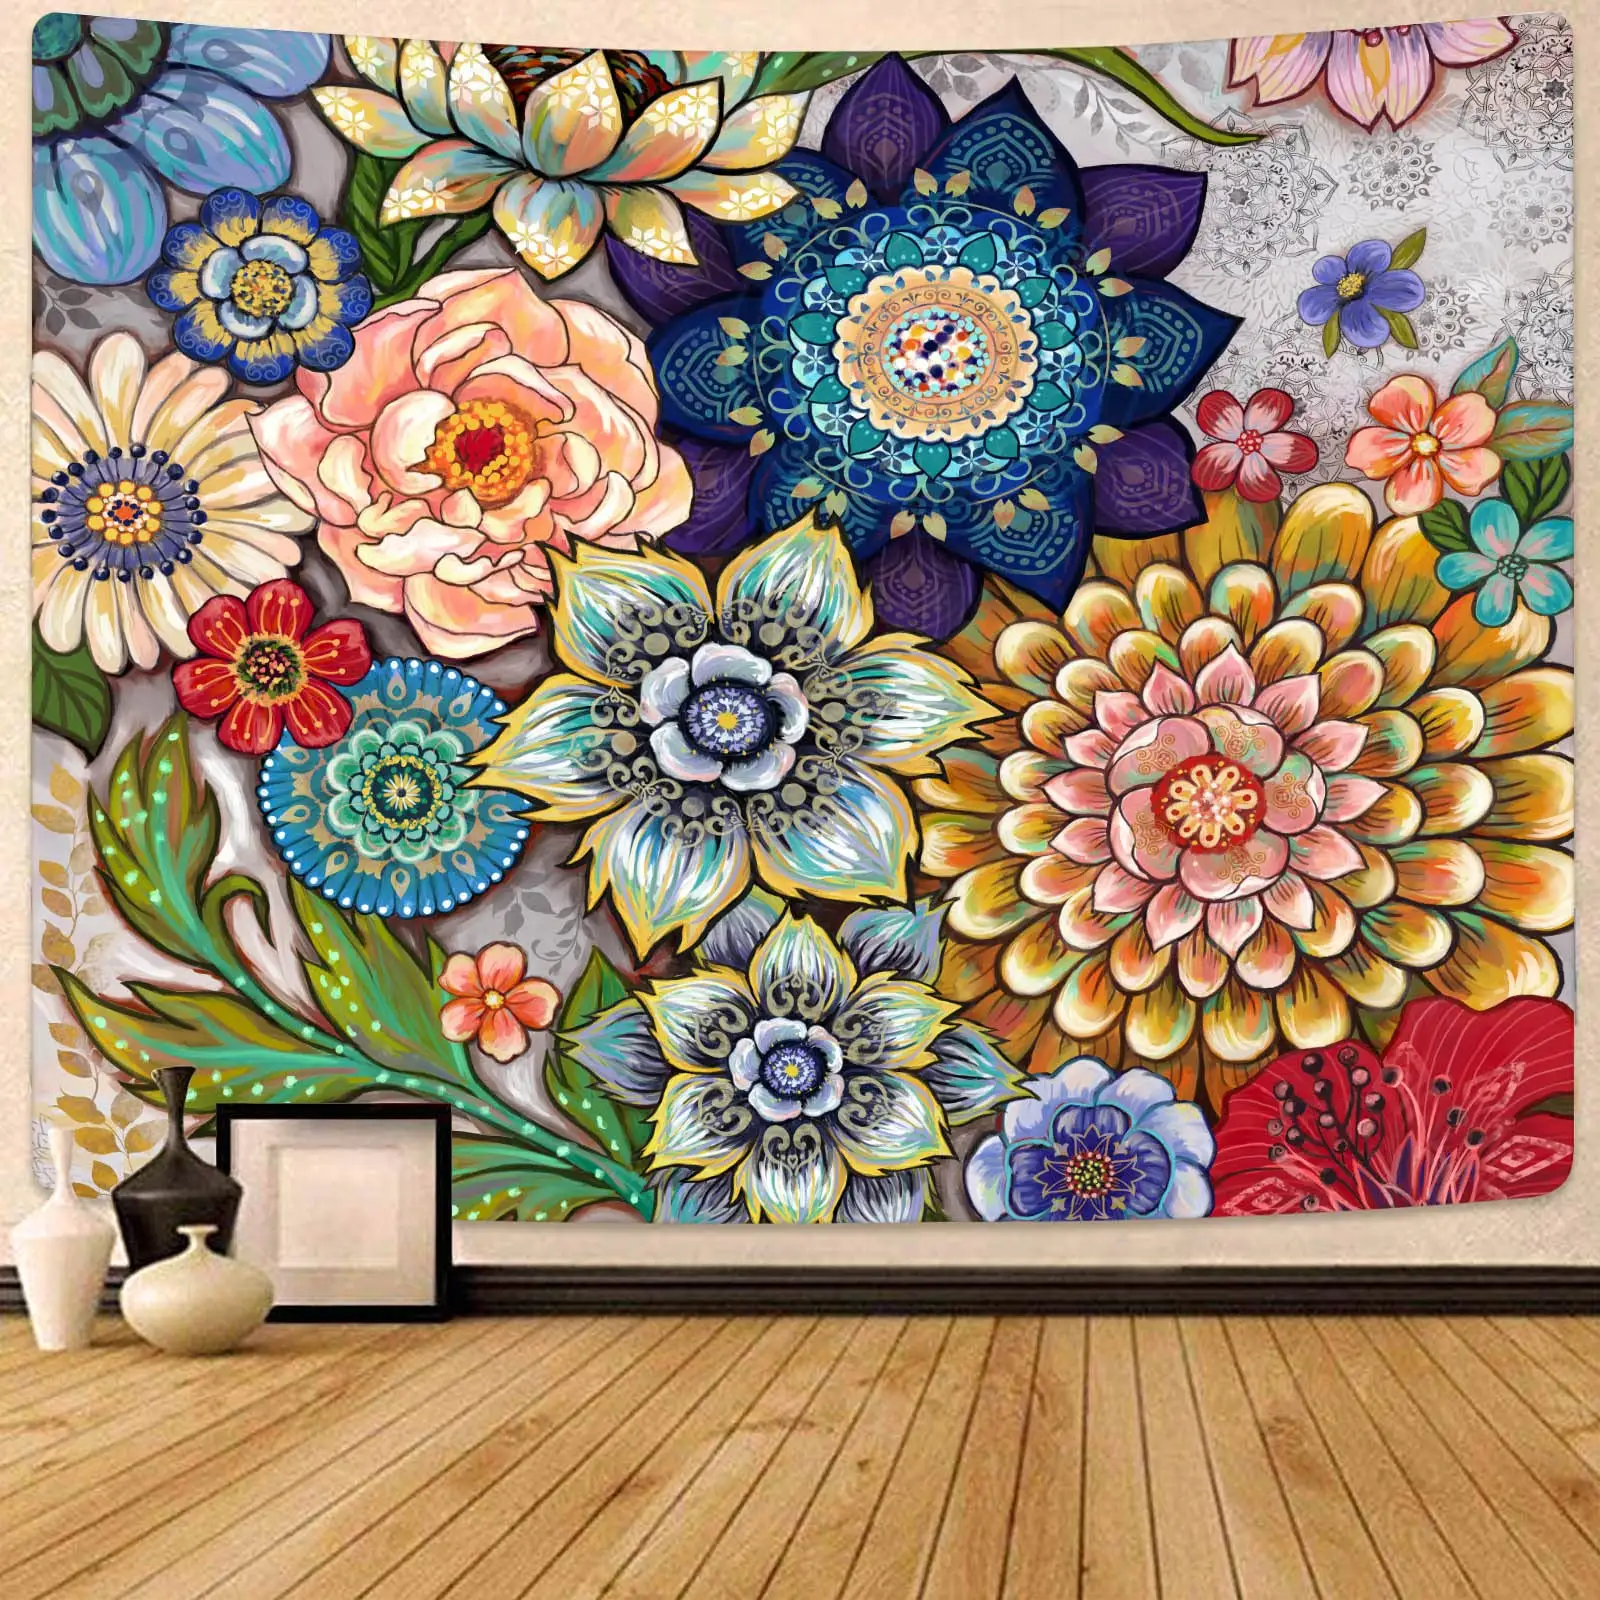 Colorful Floral Tapestry Wall hanging, Bright Boho Fabric Blossom Tapestries, Multi Color Tapestry for Bedroom Home Hippie Wall